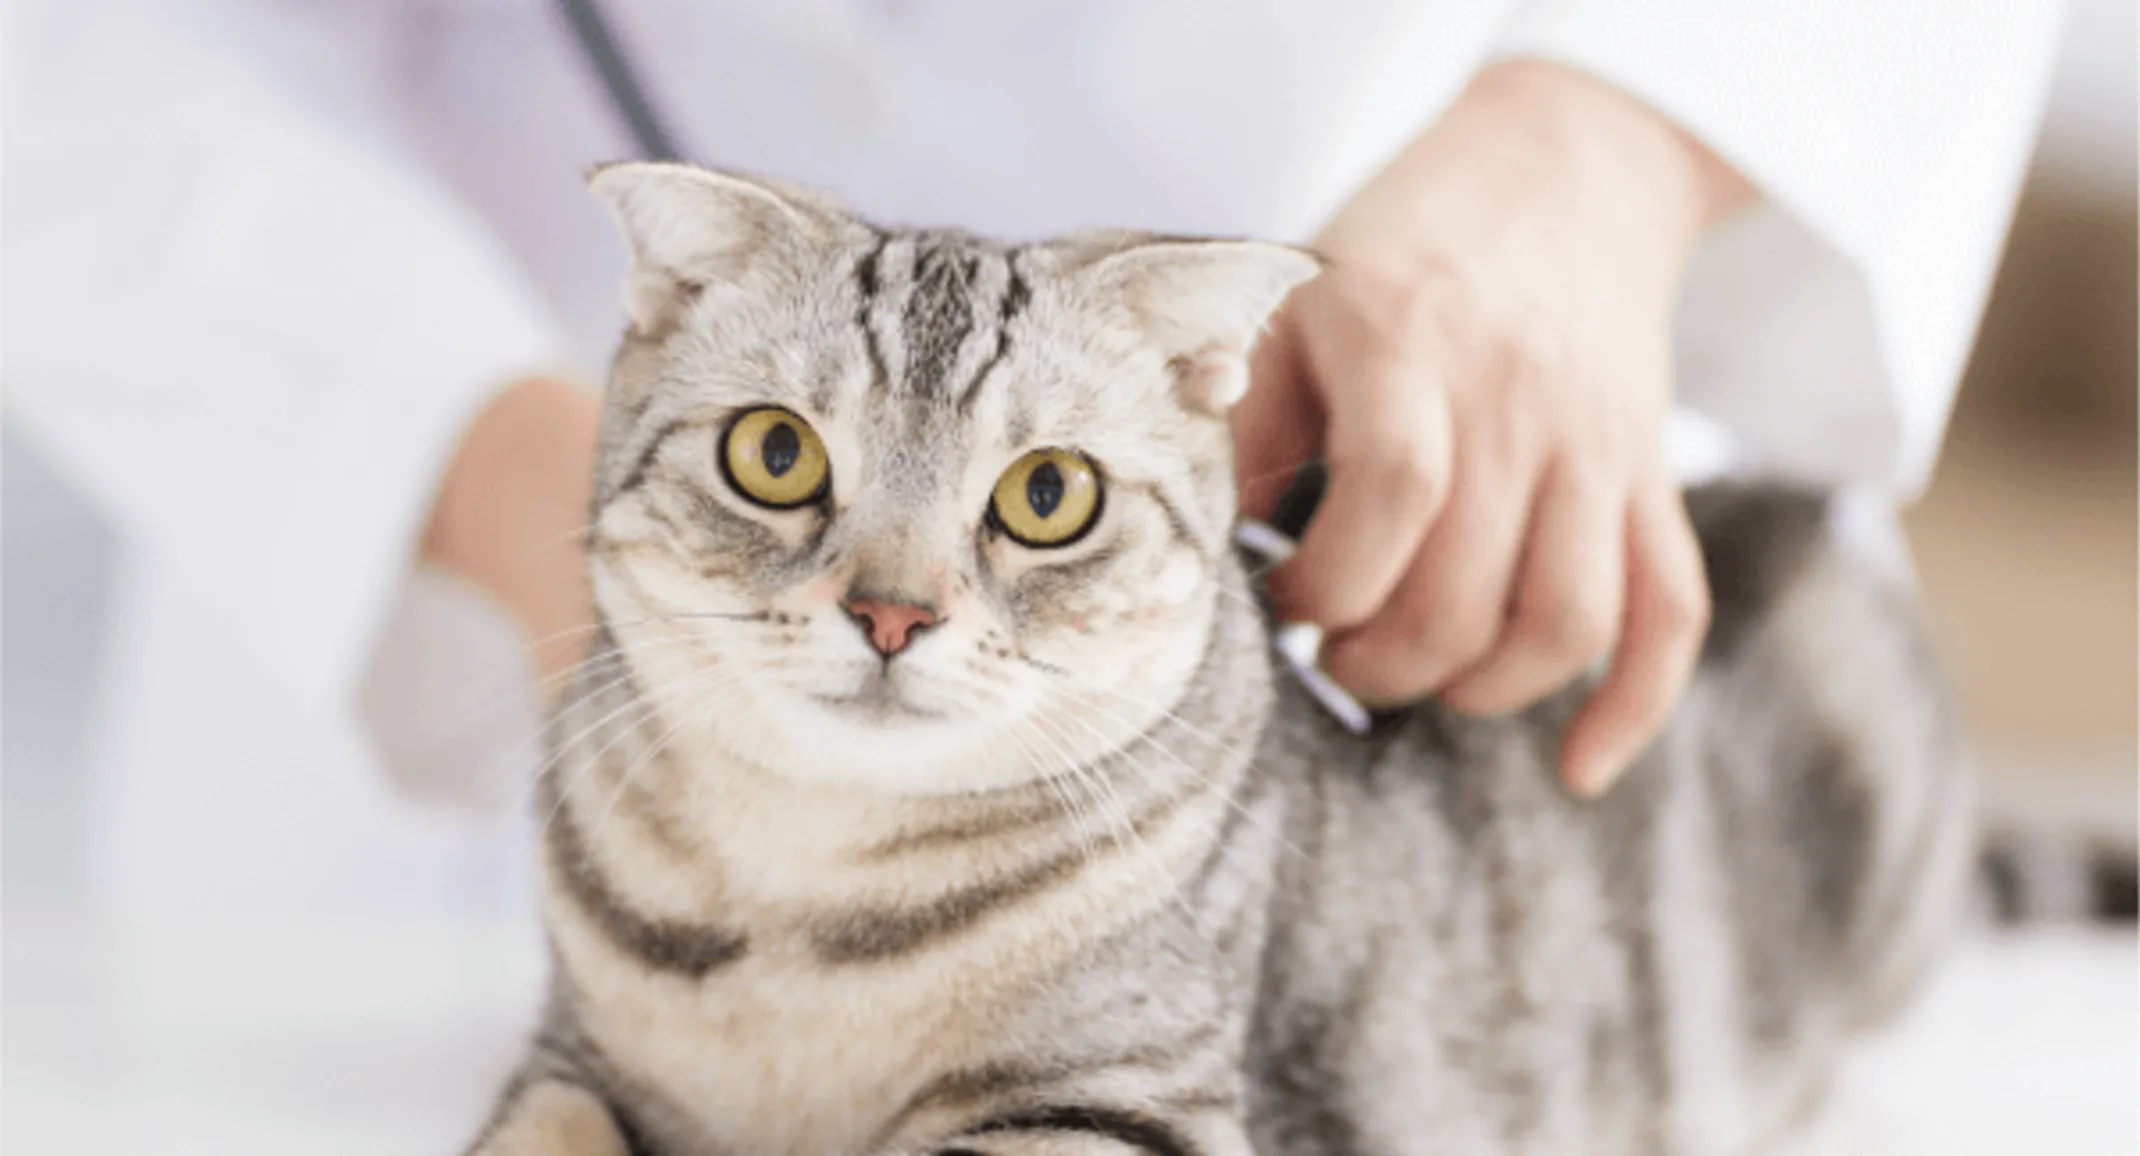 A grey tabby cat is on a medical table about to get a checkup by a Veterinarian.